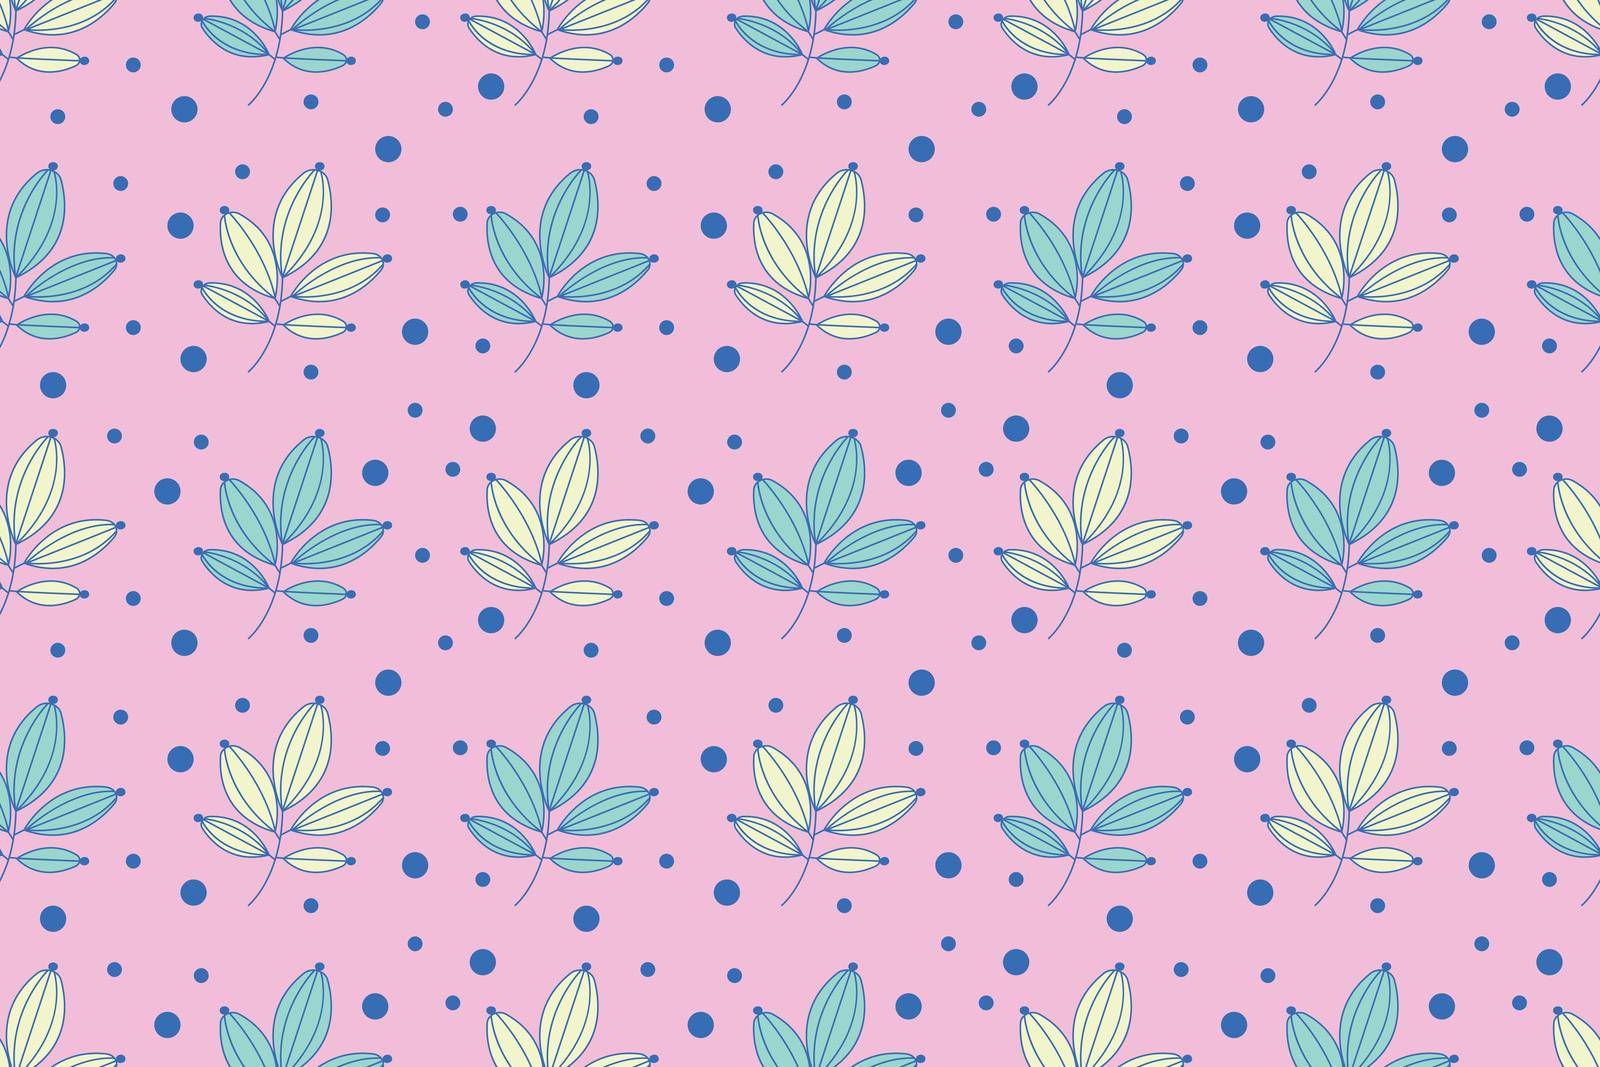 Seamless pattern with abstract flowers. Vector design with ornamental plants, can be used for textiles, wallpaper, children clothing, wrapping paper. Vector illustration